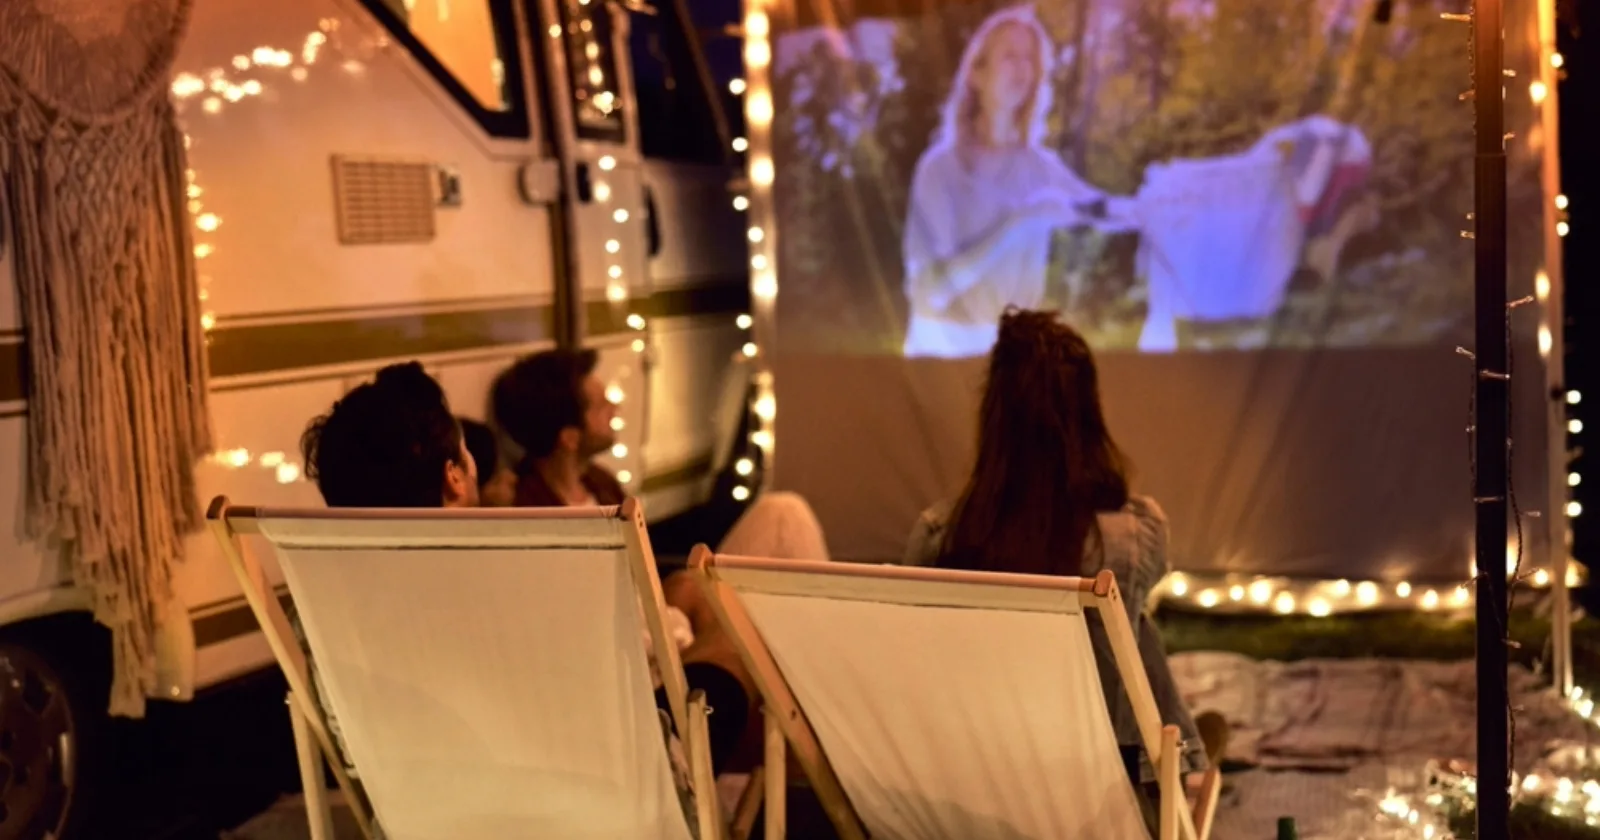 Young cheerful people watching a movie outdoors by their RV on camping site during RV movie night